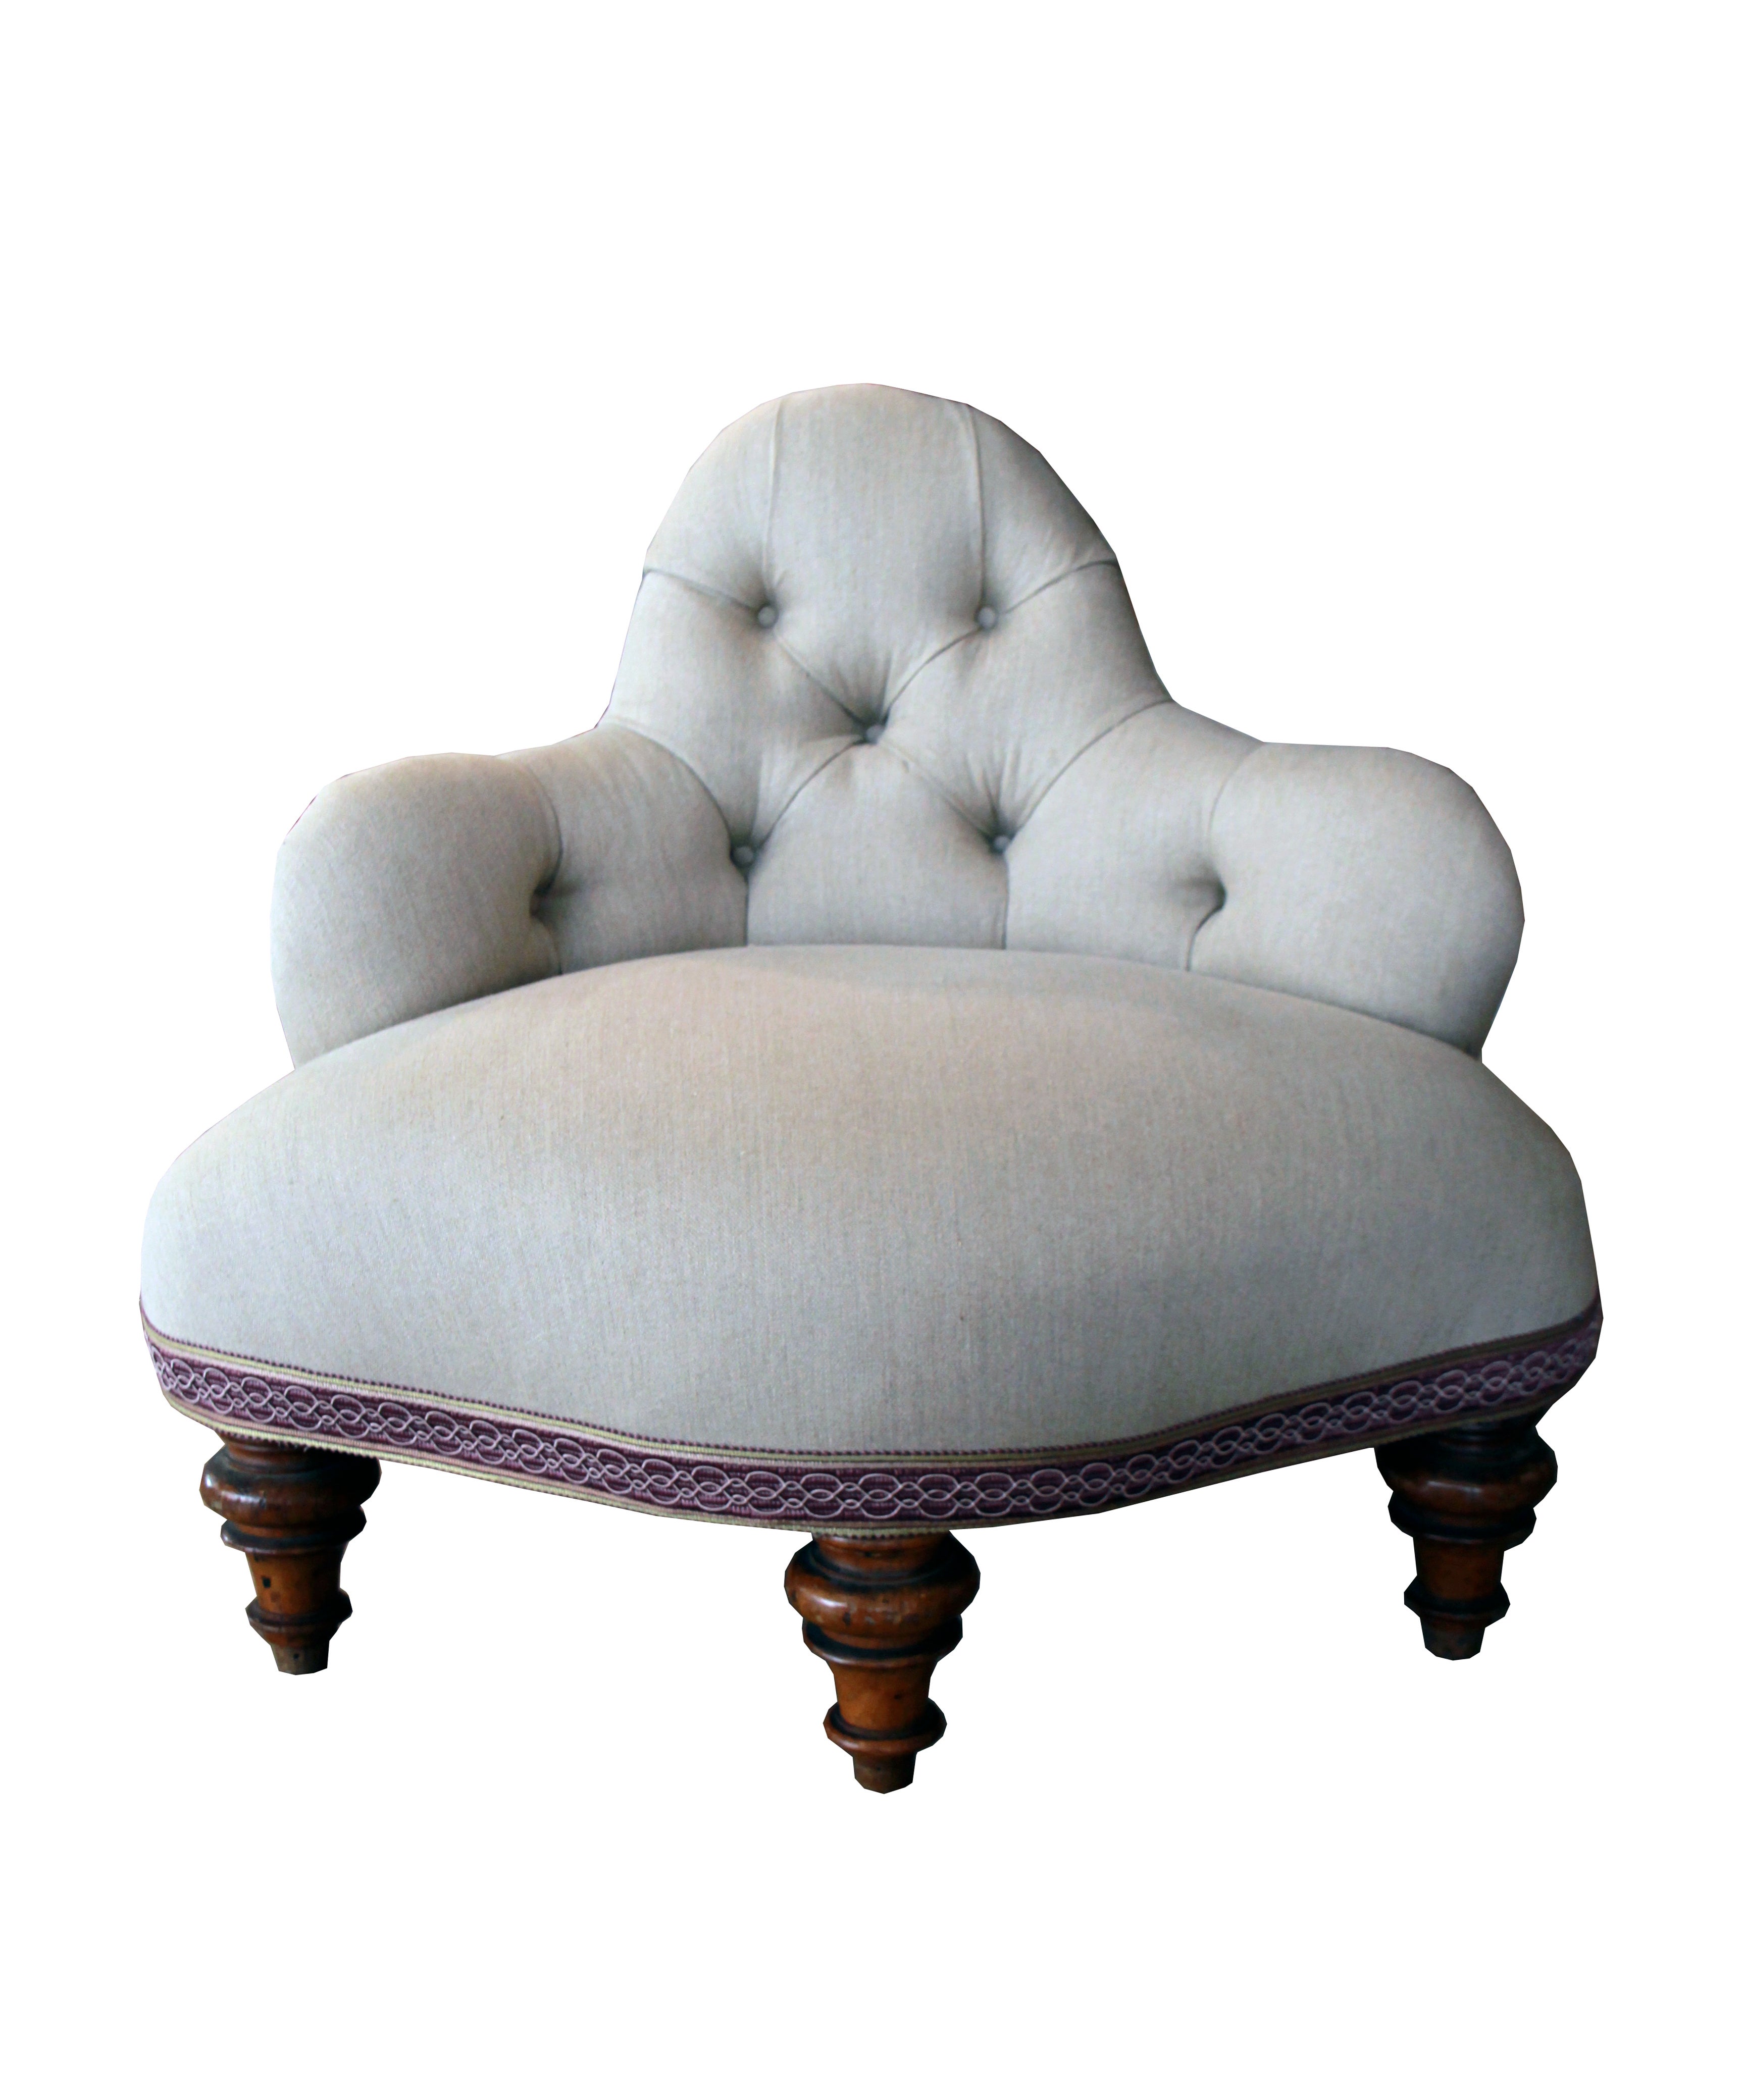 18th C. Petite Tufted Chair